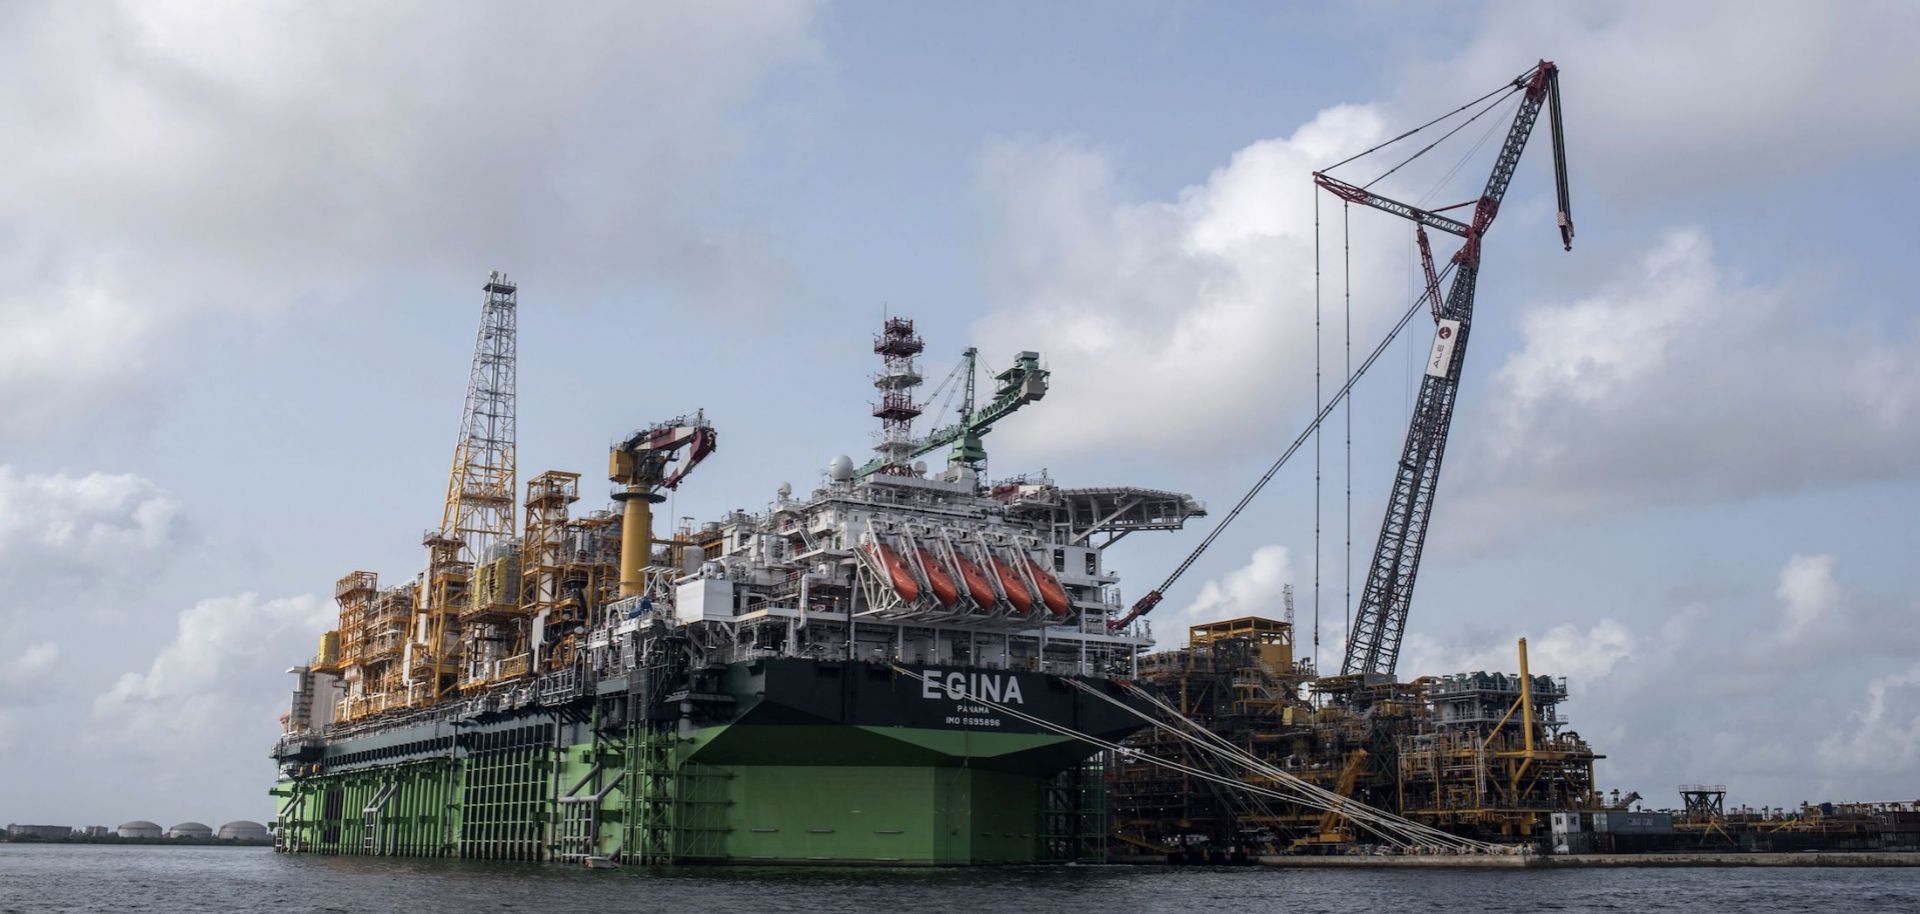 A photo shows the Egina FPSO (Floating Production Storage and Offloading) unit berthed at a harbor in Lagos, Nigeria. 